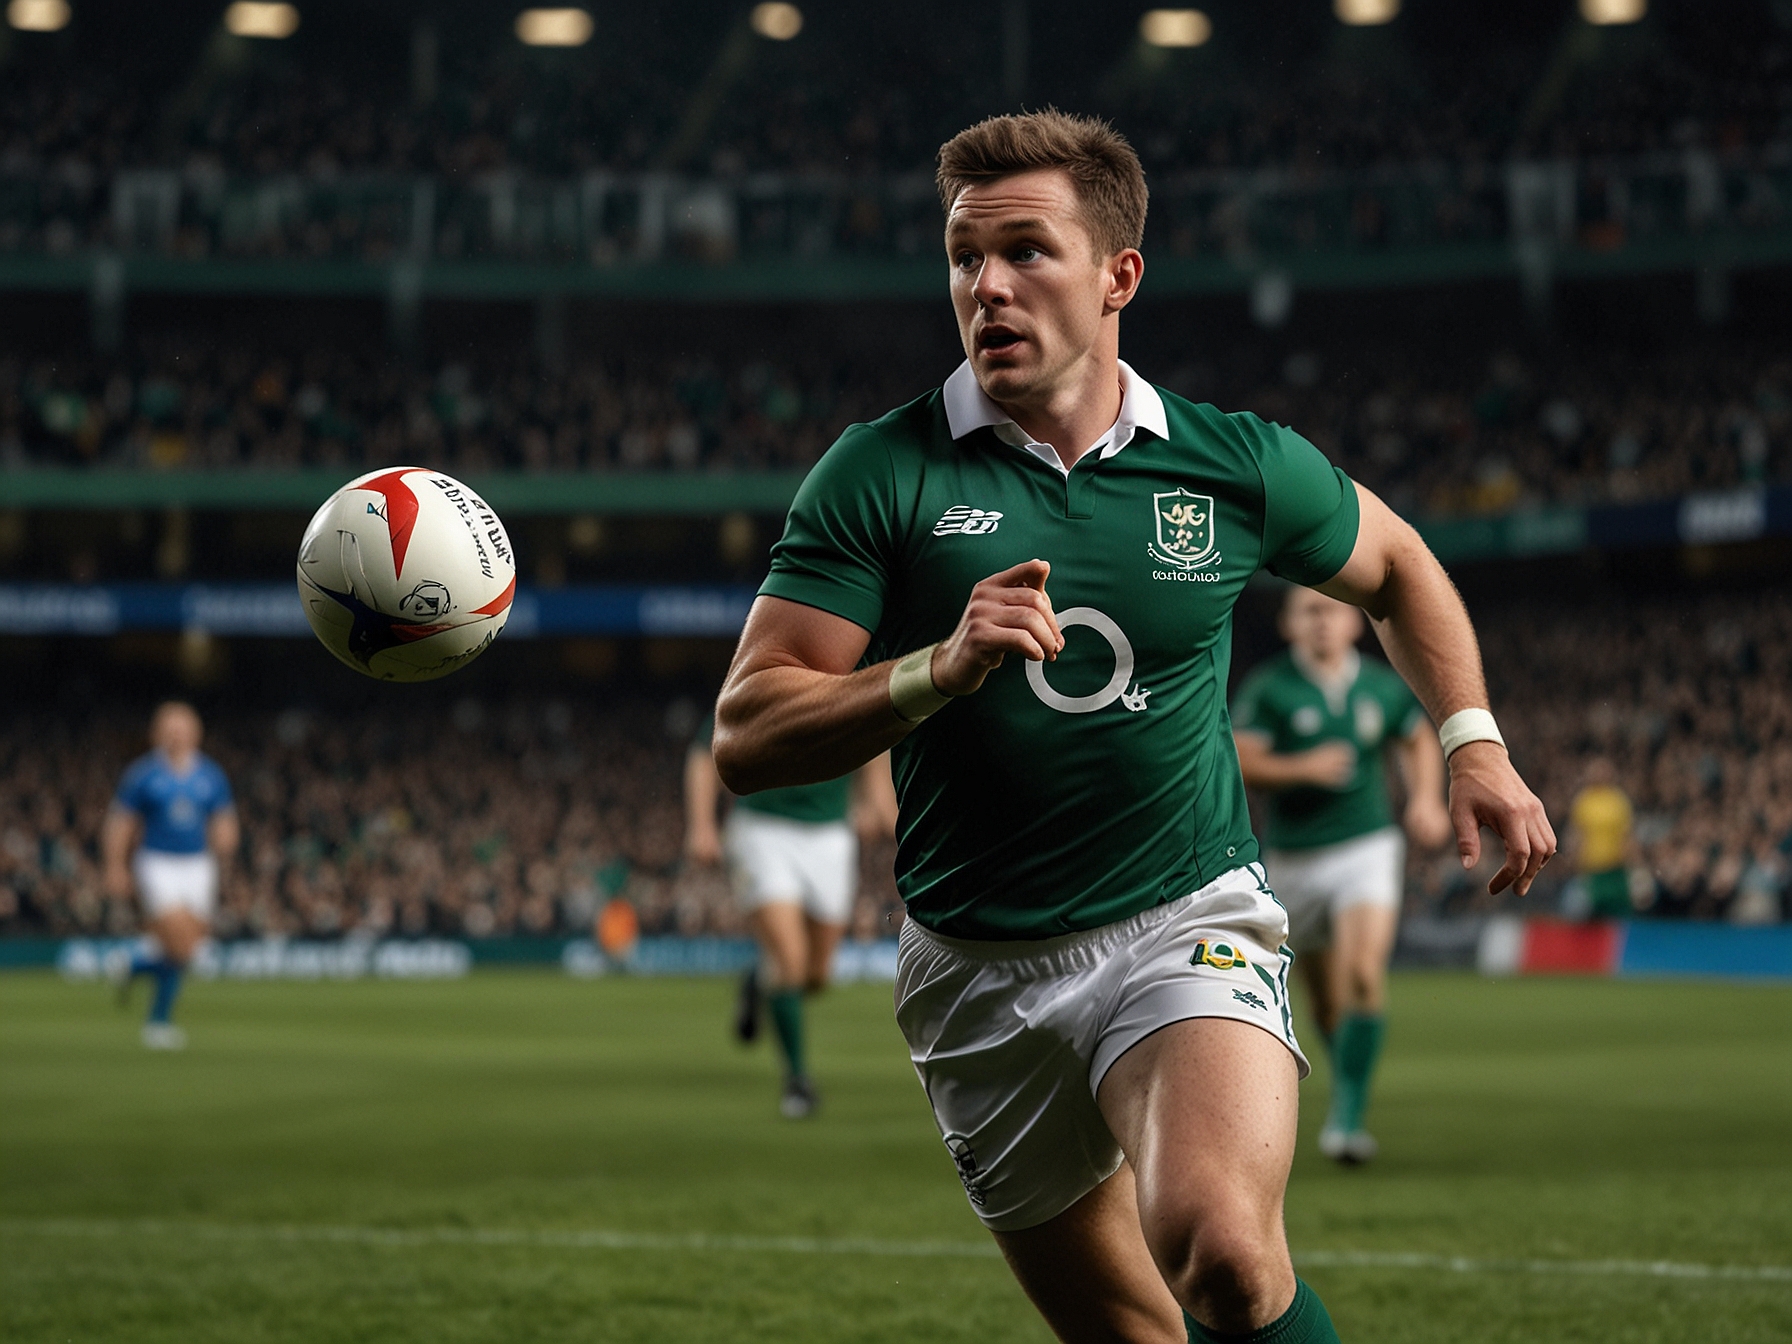 Photo capturing Craig Casey making a swift pass during a game, illustrating his speed and playmaking ability that could be crucial for the Irish squad's strategy against South Africa.